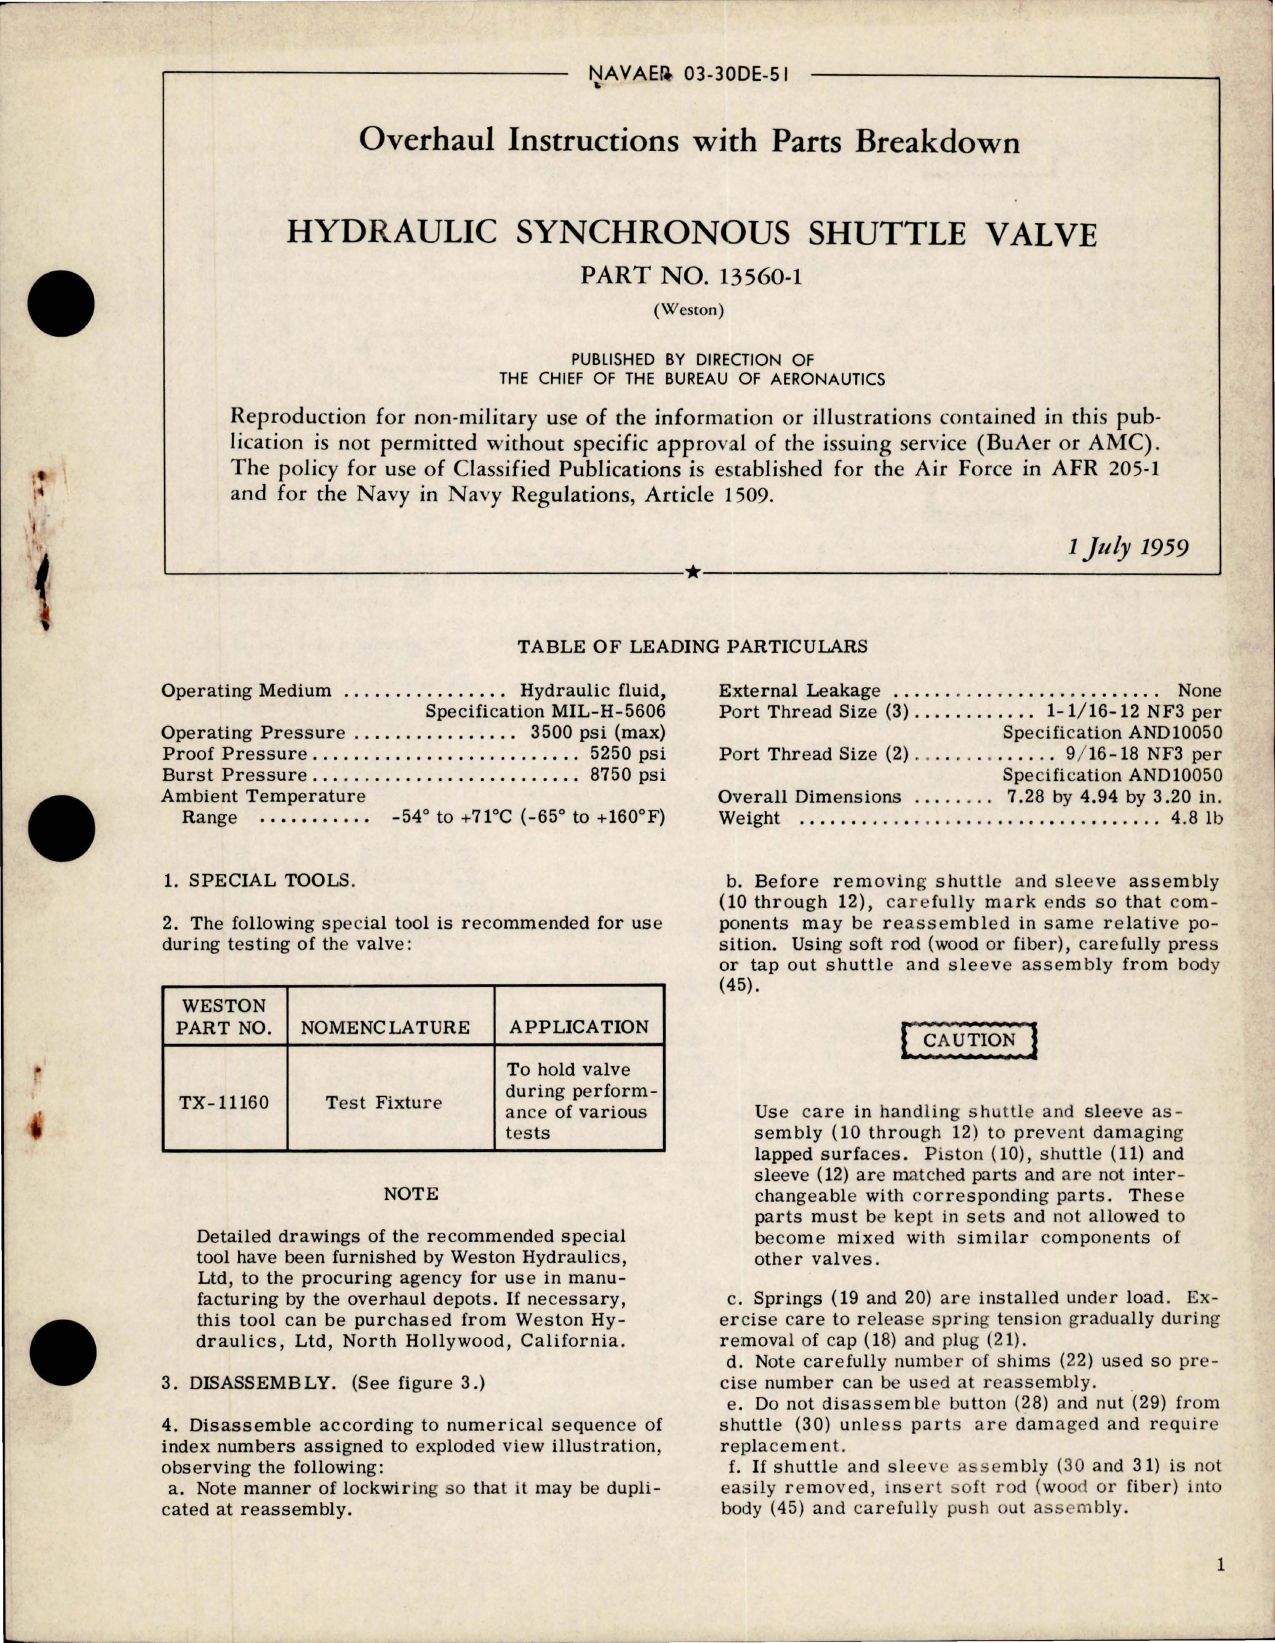 Sample page 1 from AirCorps Library document: Overhaul Instructions with Parts Breakdown for Hydraulic Synchronous Shuttle Valve - Part 13560-1